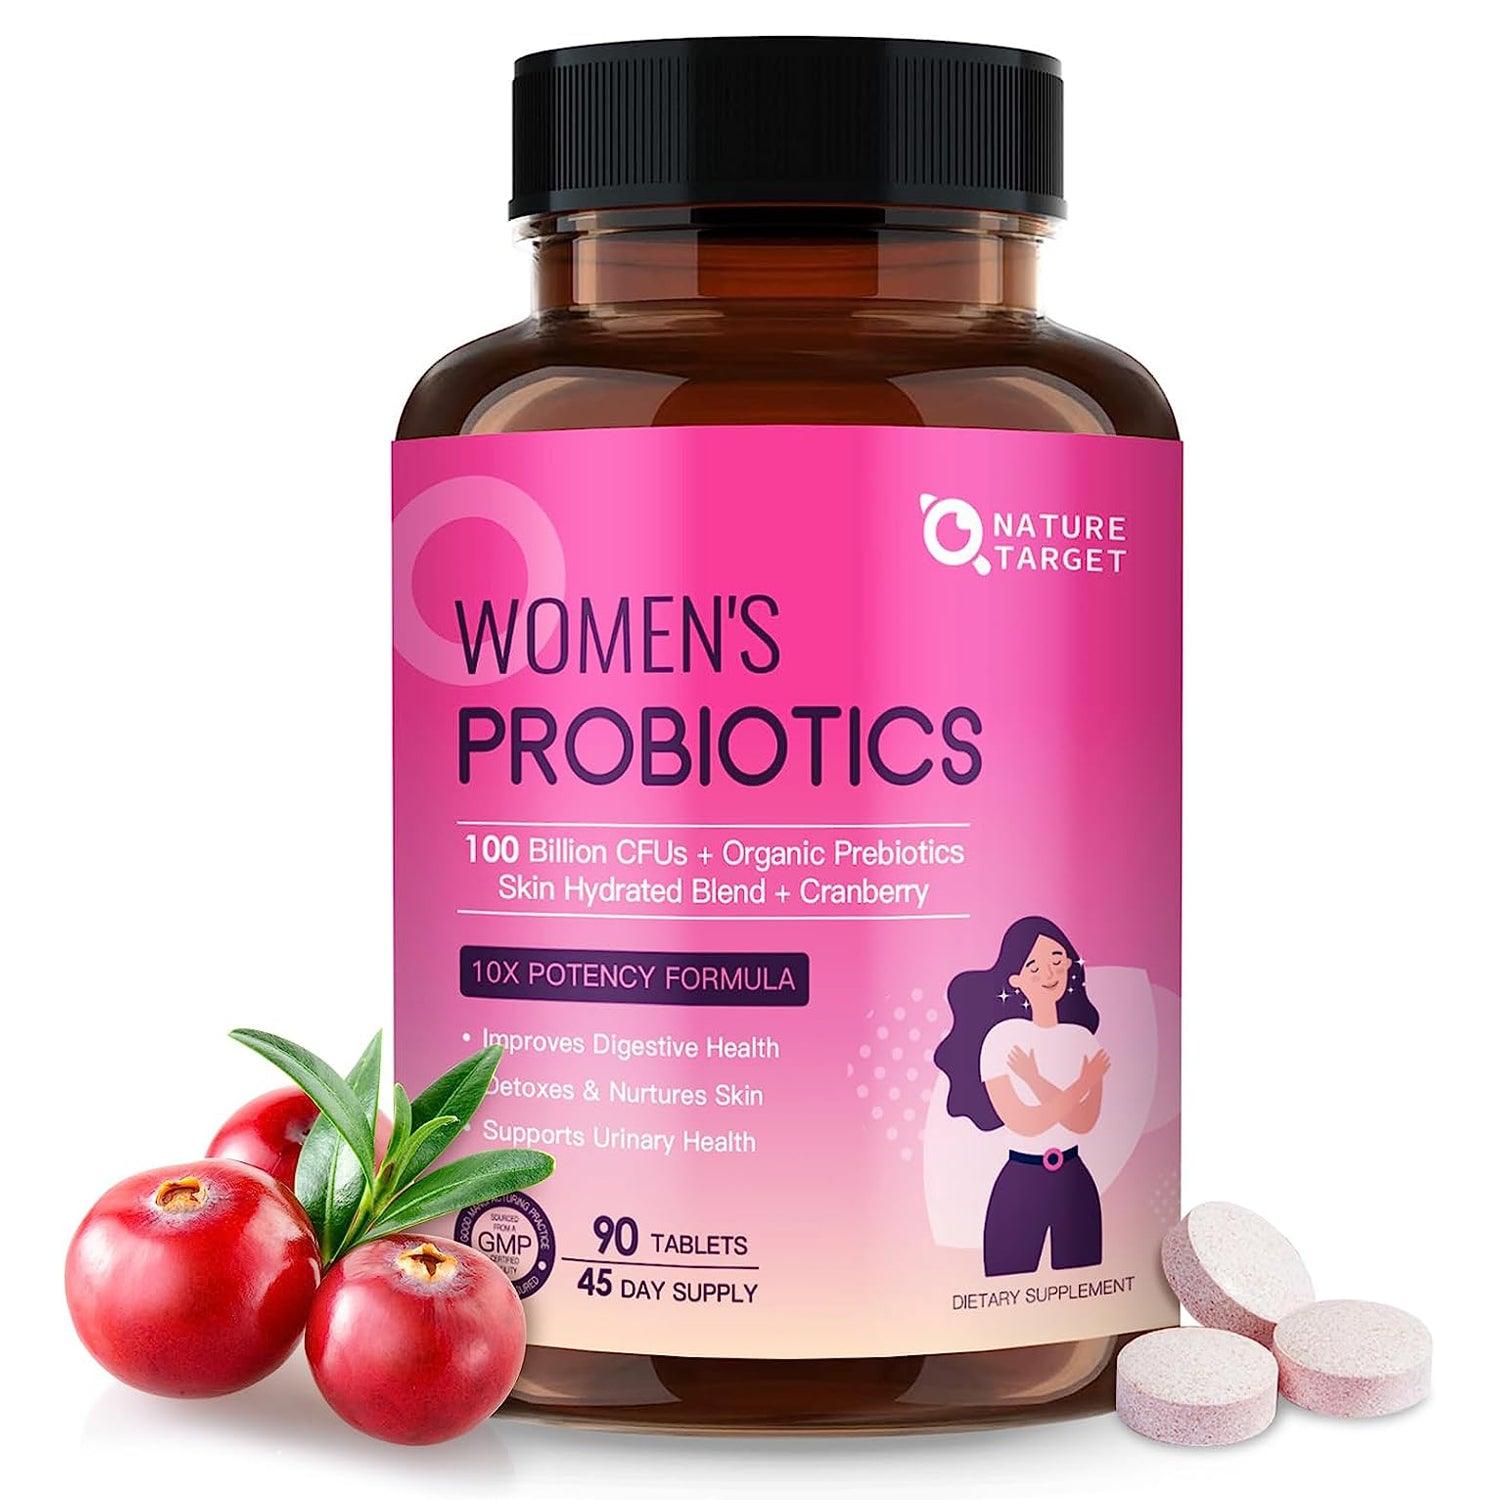 Probiotics+Vitamins+Prebiotic for Women, with Skin and Vaginal Health